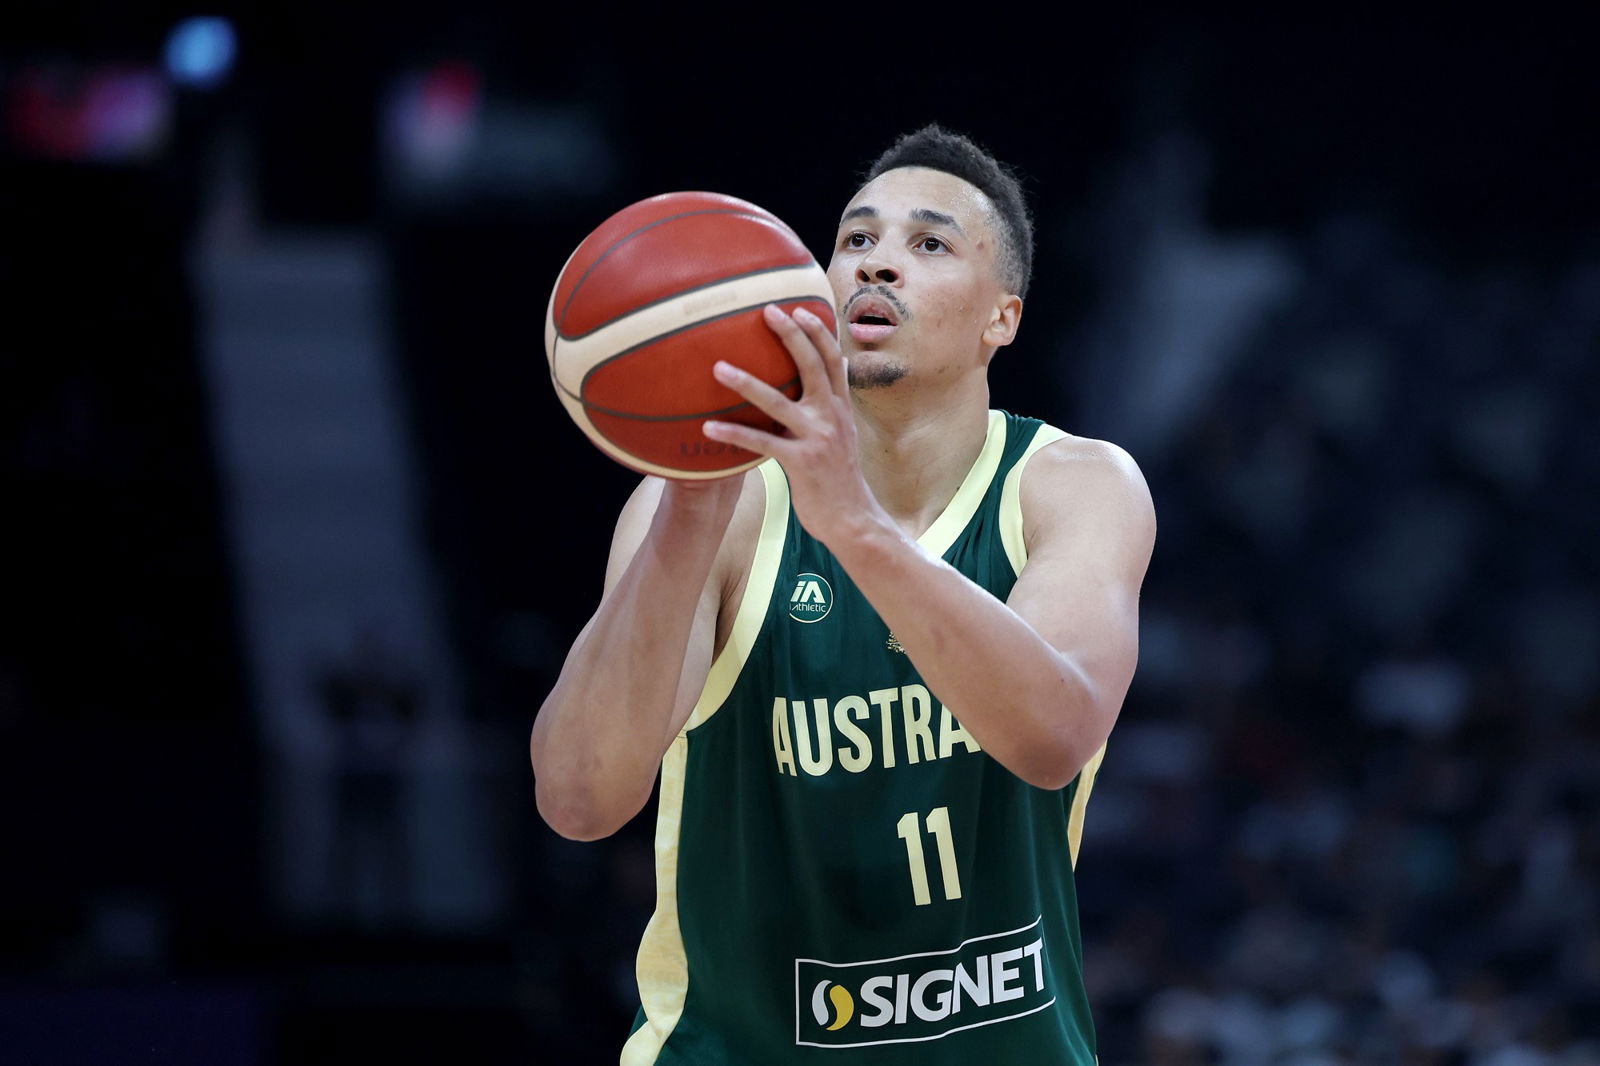 Dante Exum, wearing an Australian team uniform, holds a basketball with a focussed expression on a basketball court